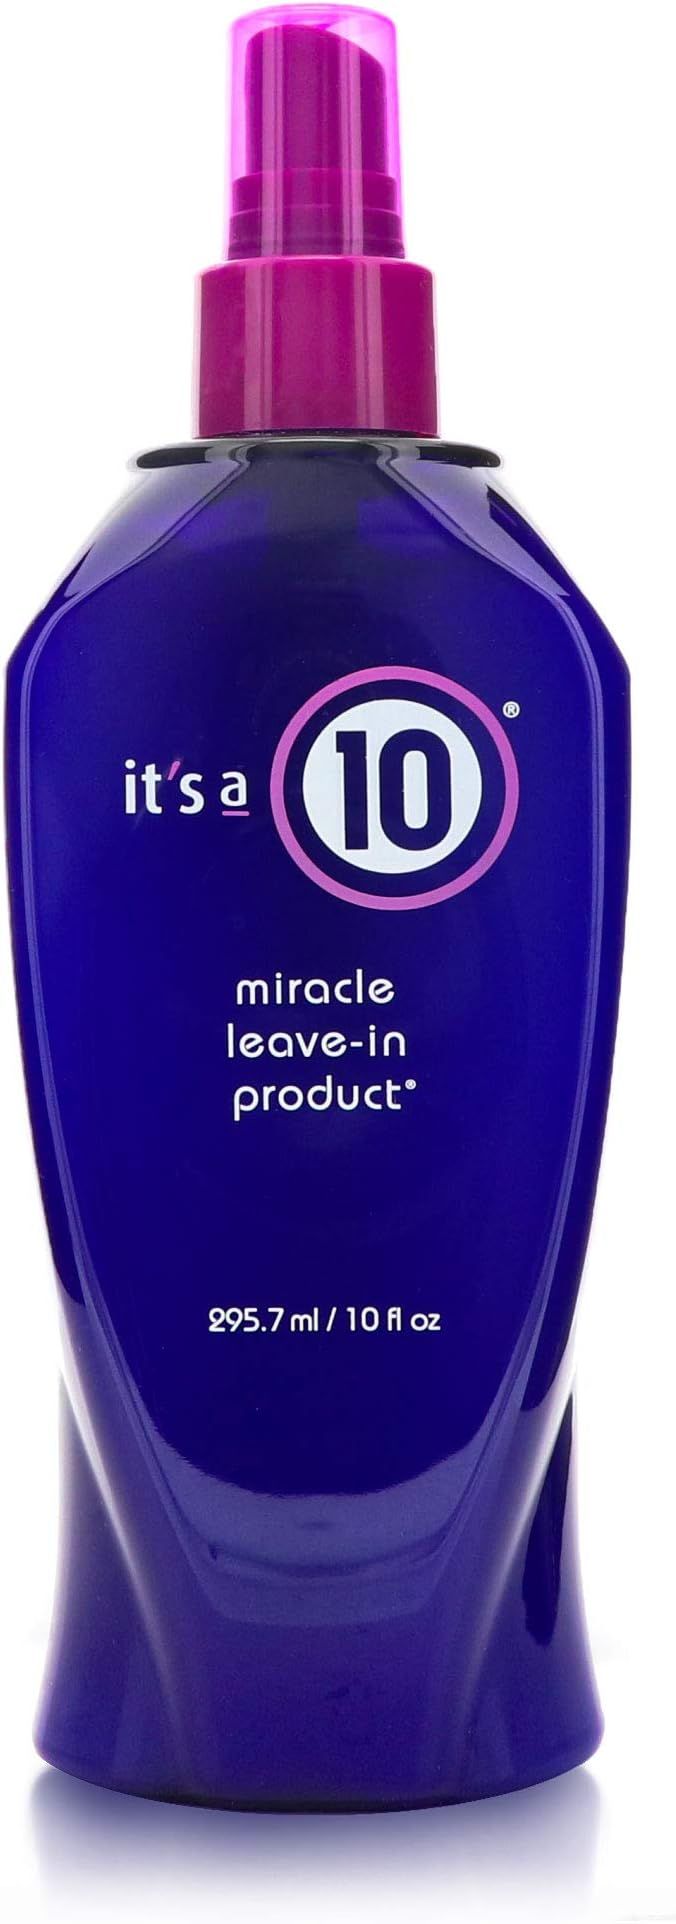 It's a 10 Haircare Miracle Leave-In product, 10 fl. oz. (Pack of 1), 21/10 | Amazon (US)